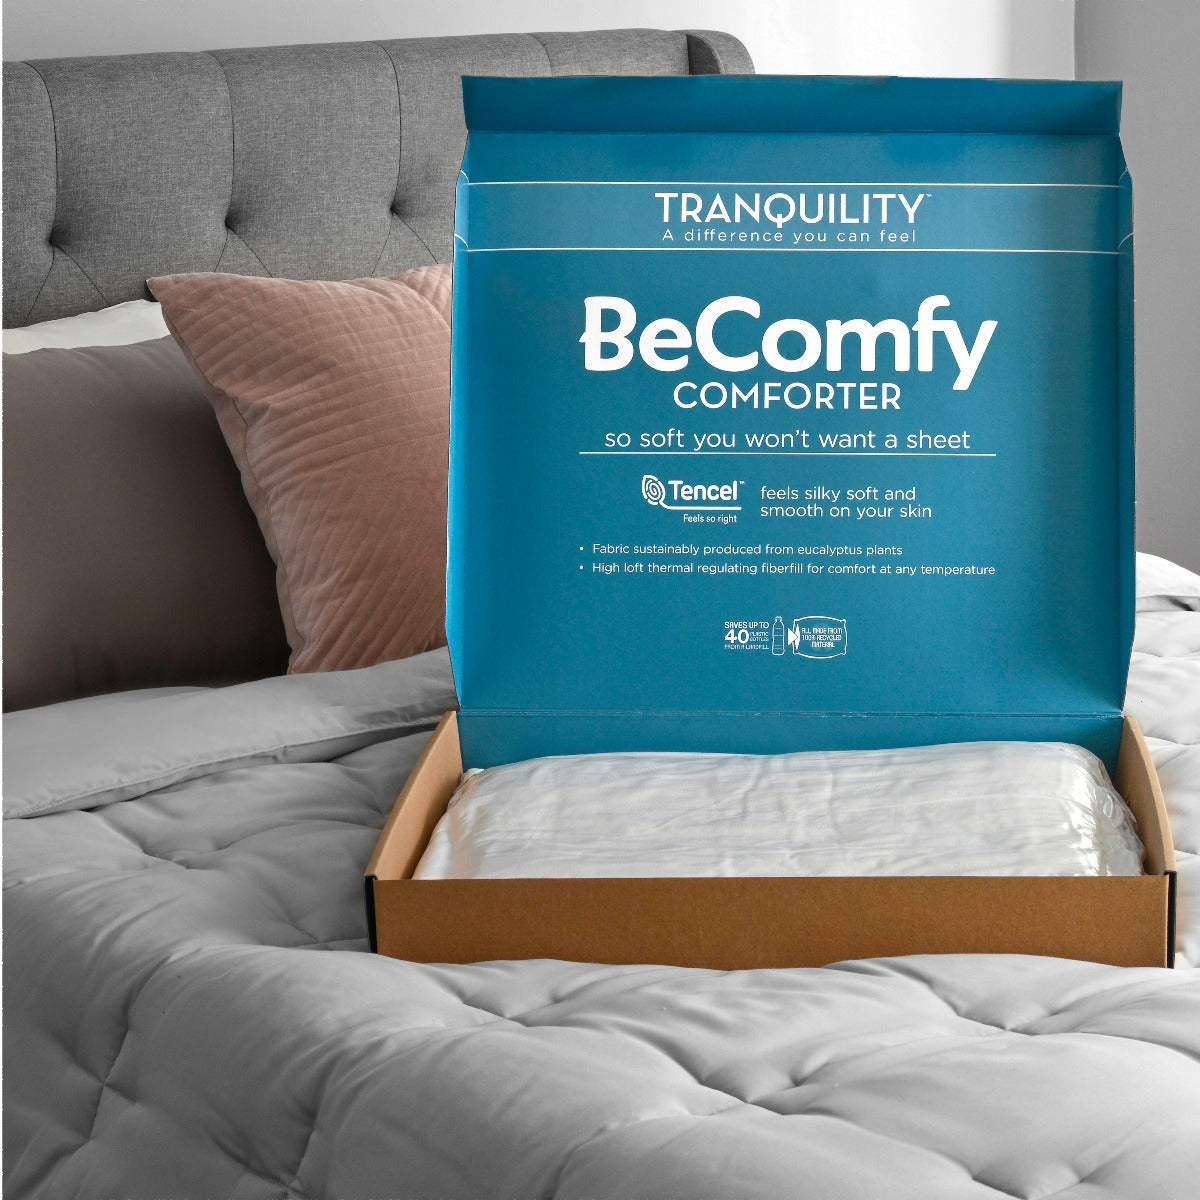 Sealy Soft Fluffy Comforter Twin - White